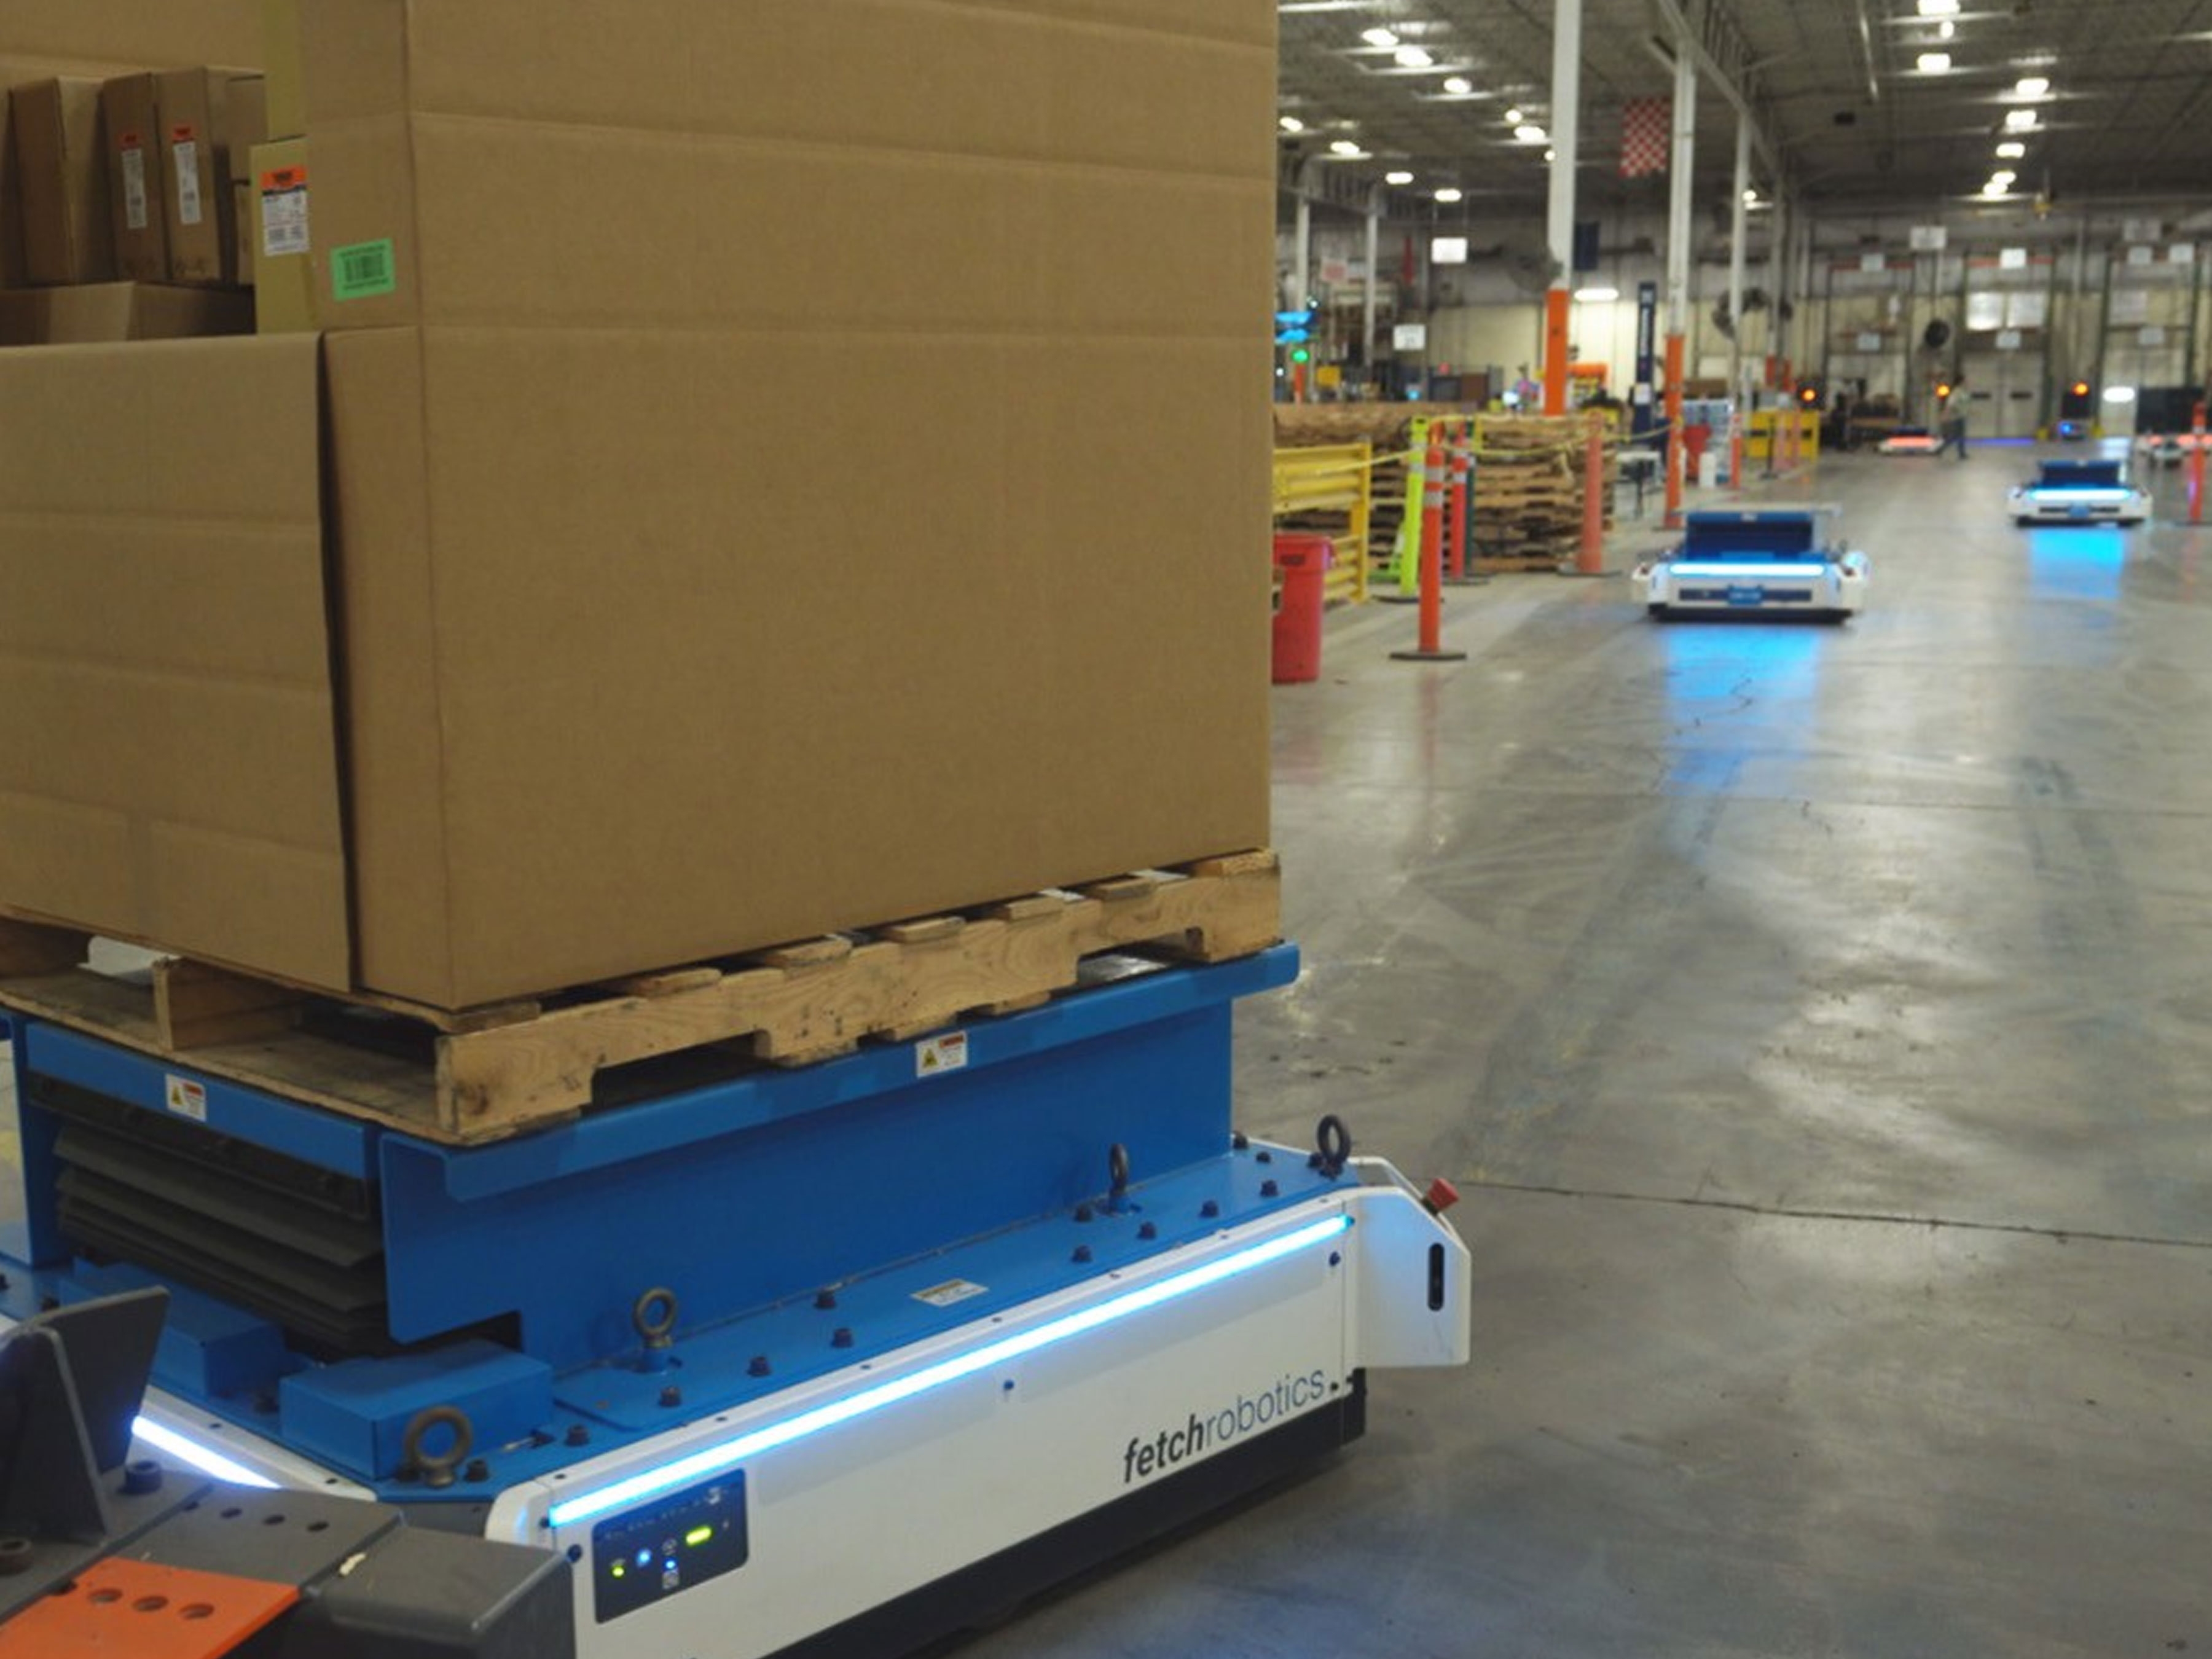 Fetch Robotics robot in the warehouse